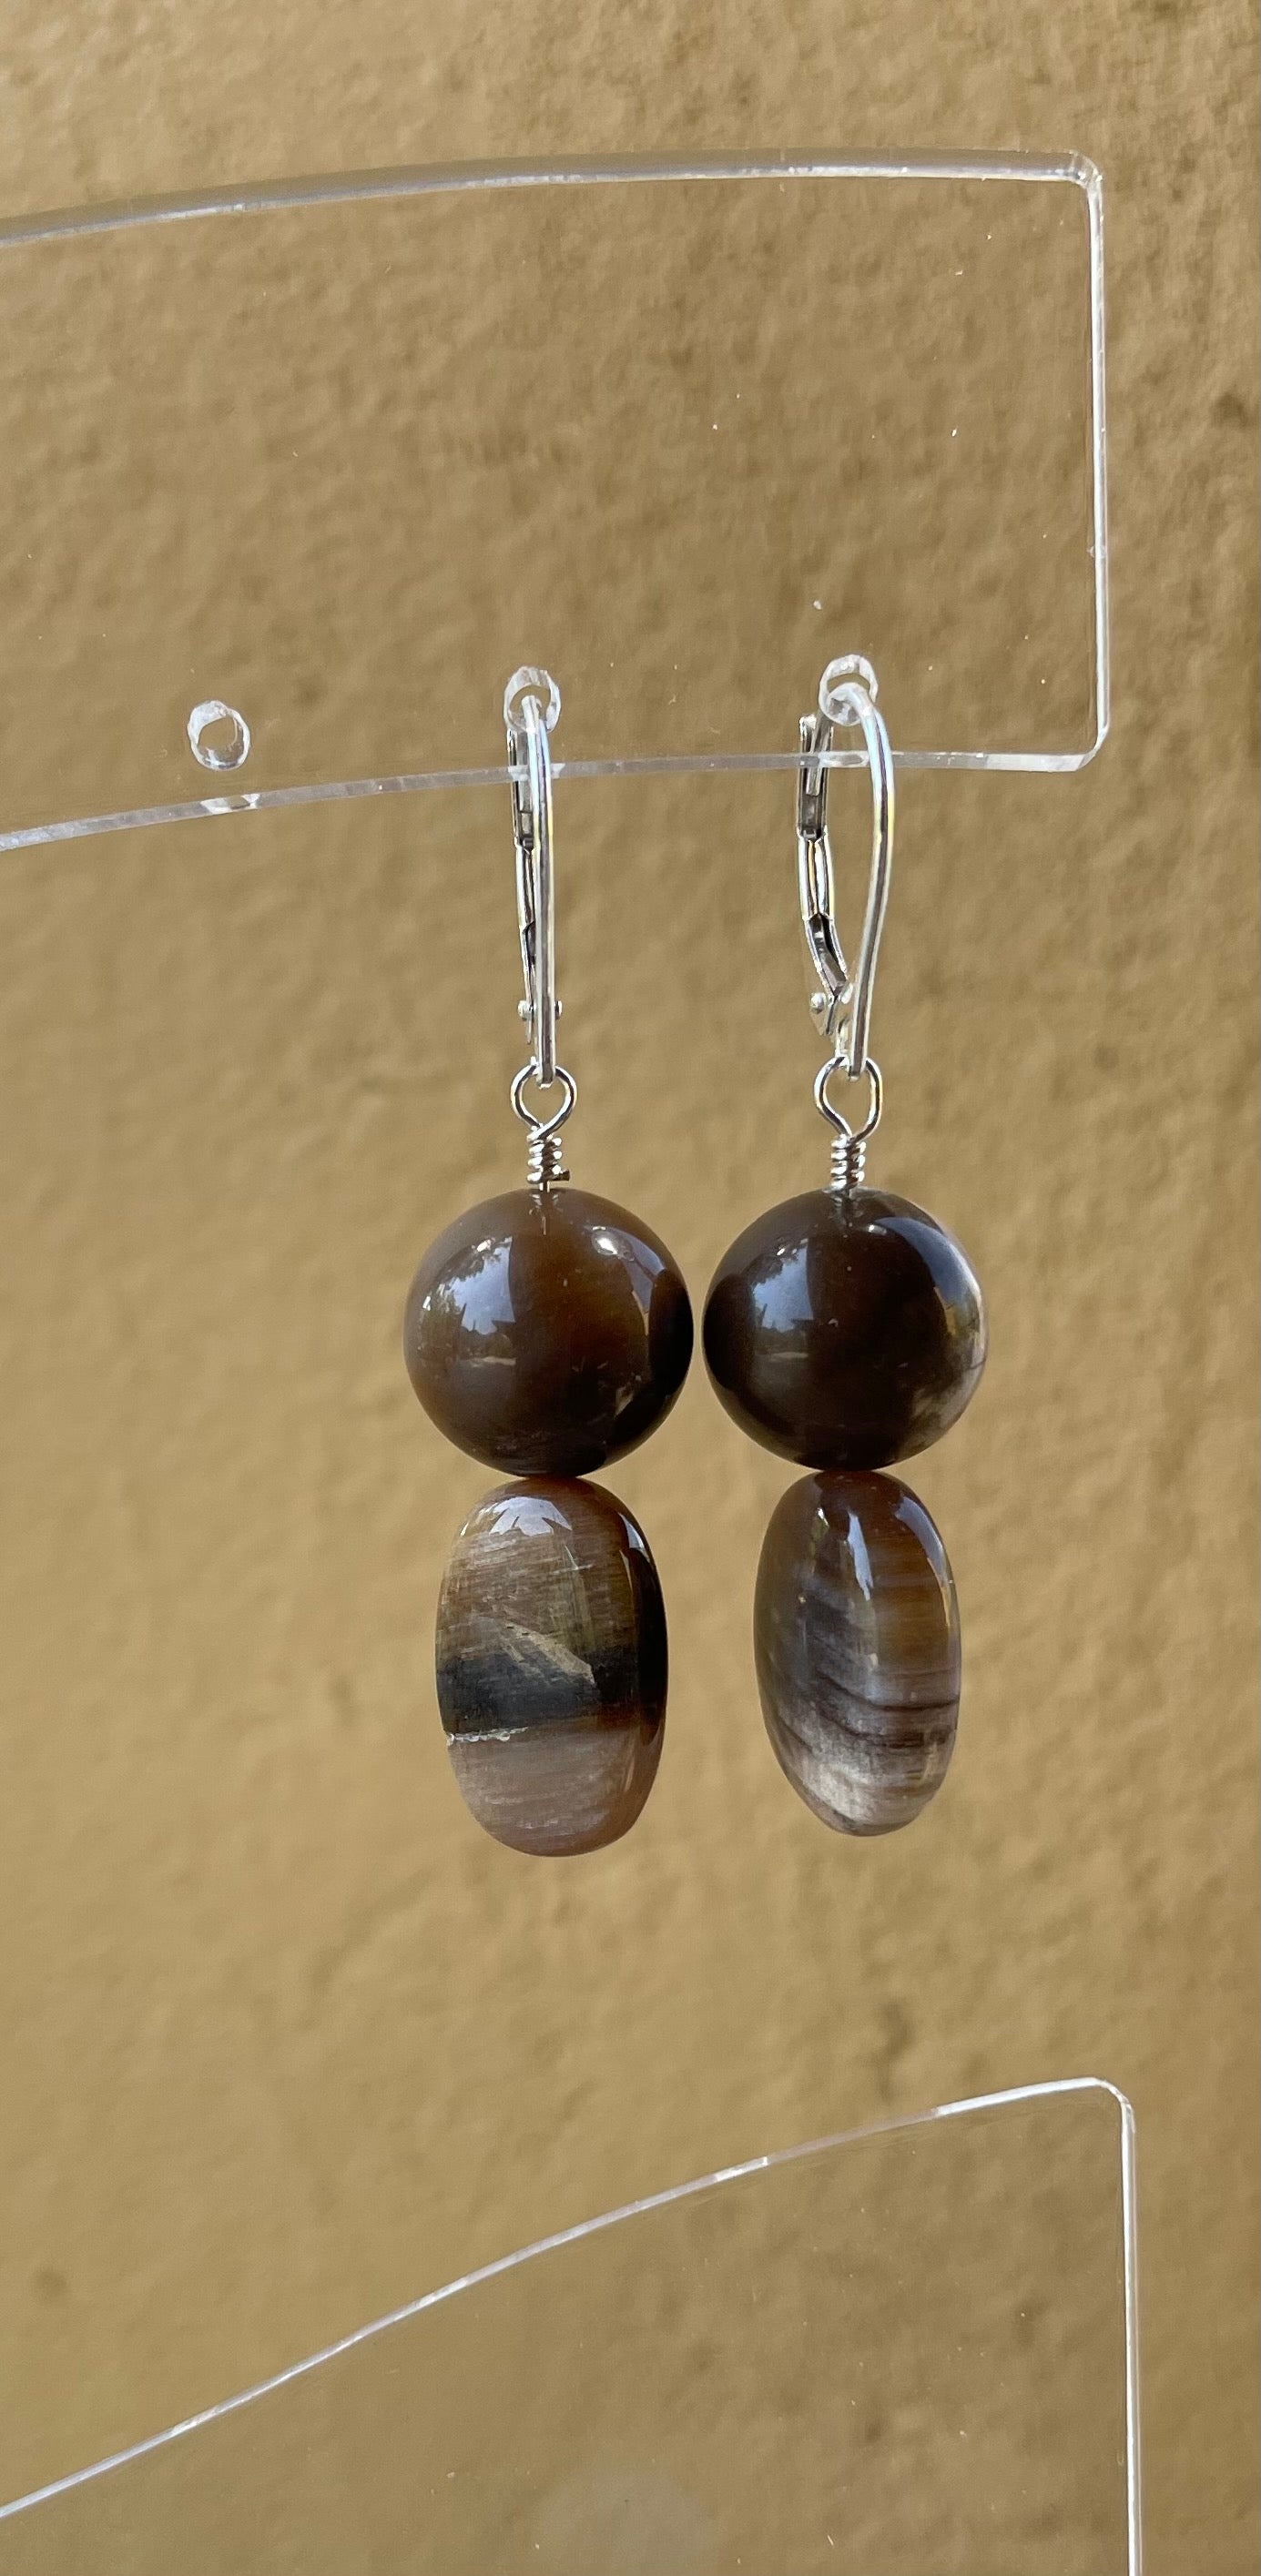 Earrings - Sterling Silver with 2 hanging petrified woods beads